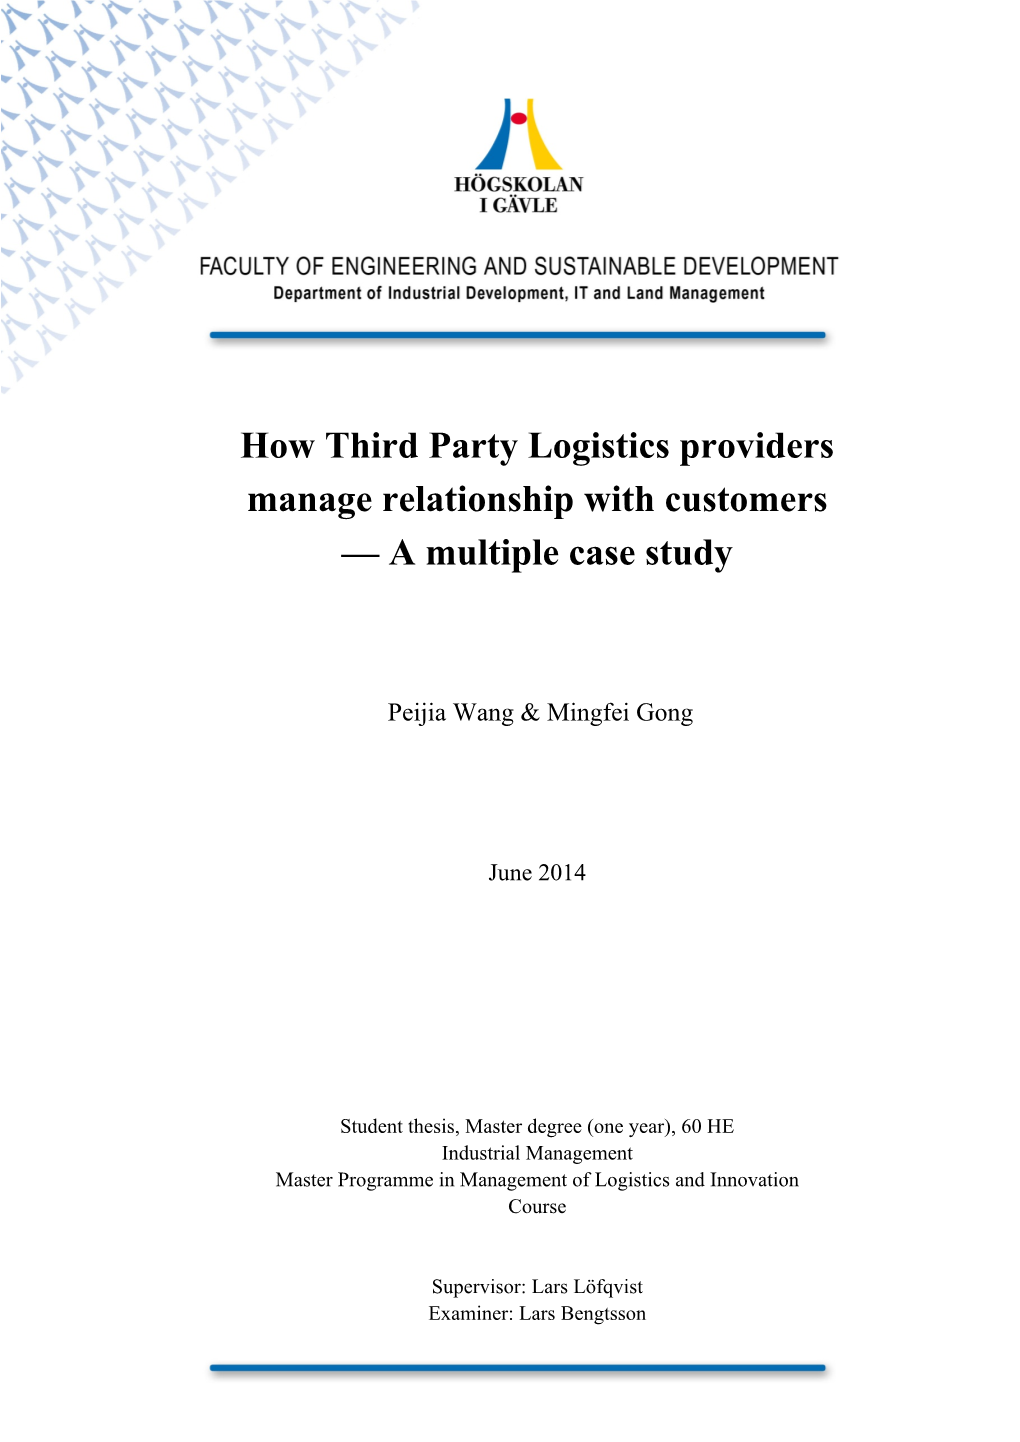 How Third Party Logistics Providers Manage Relationship with Customers — a Multiple Case Study